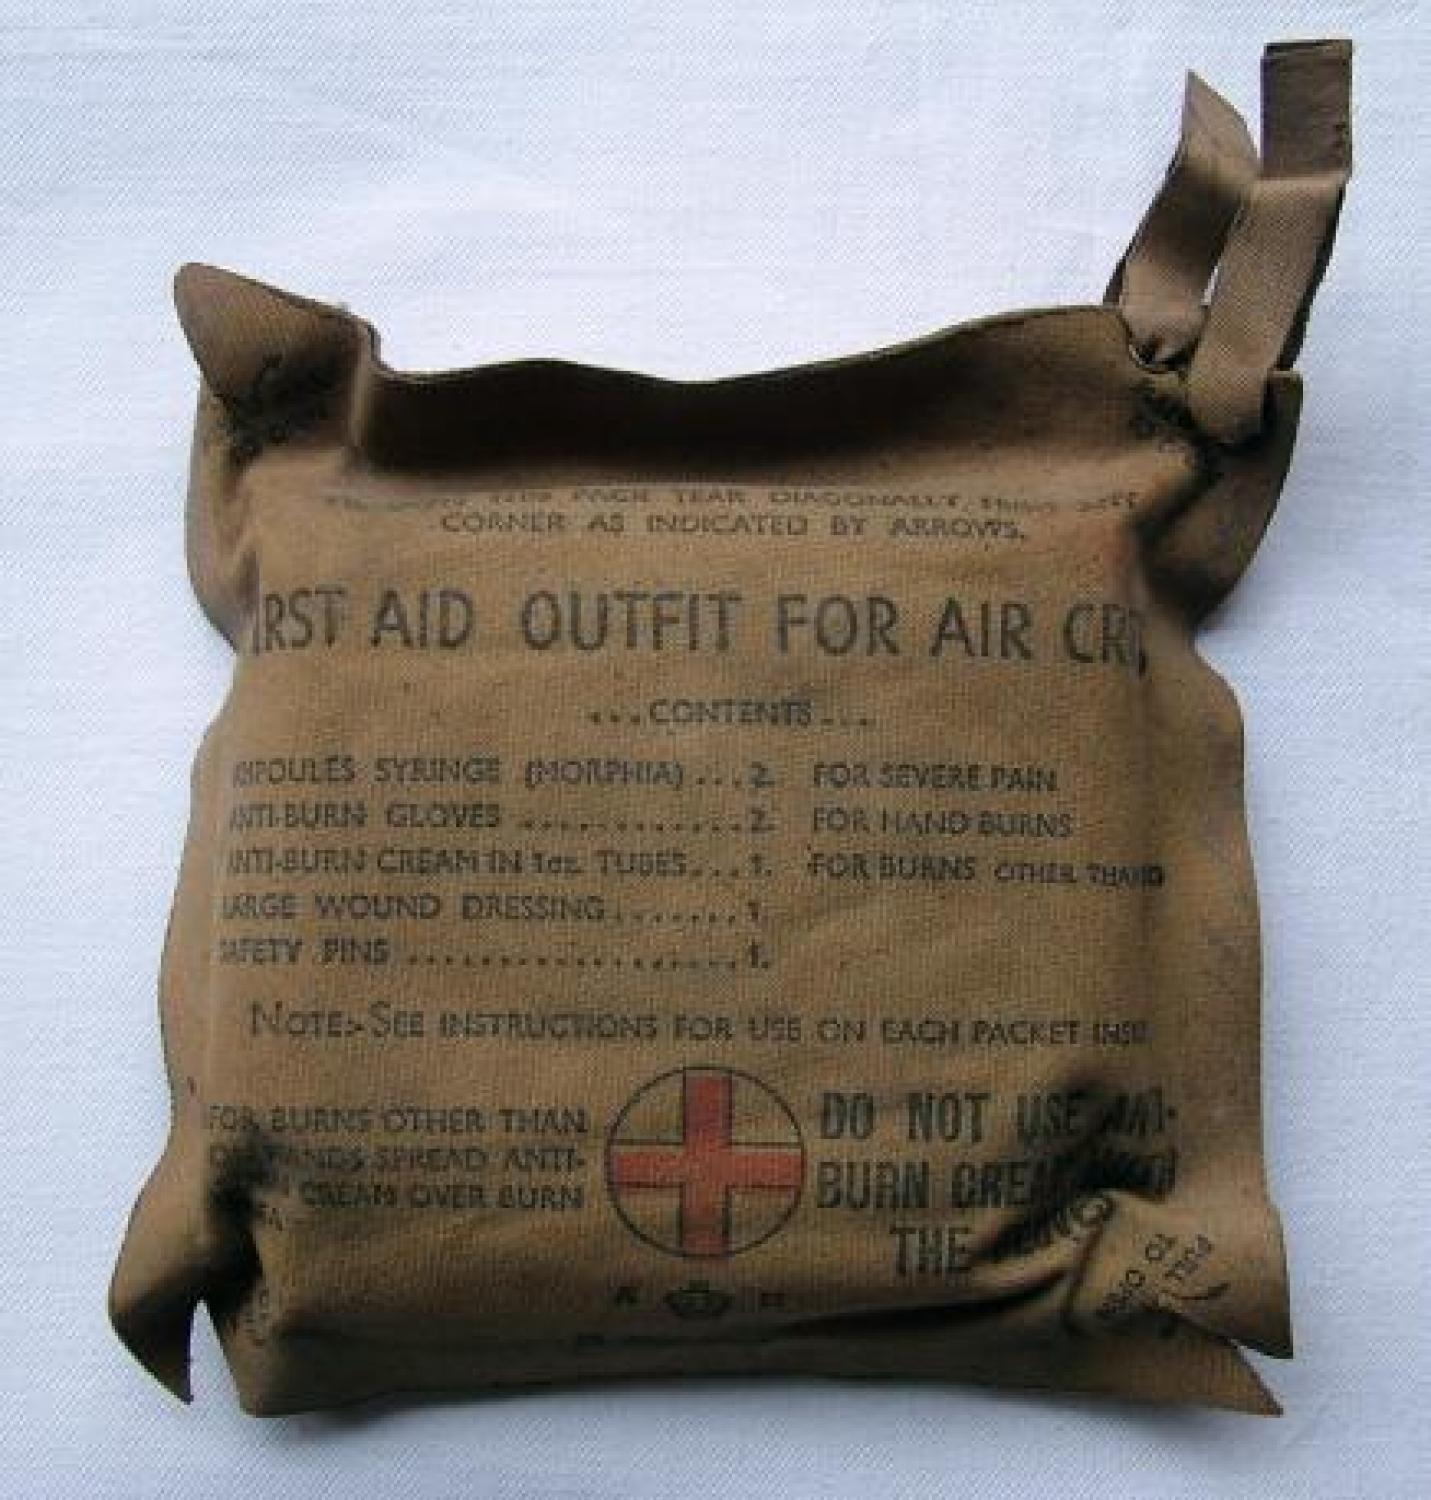 First Aid Outfit For Aircrews, MK.III